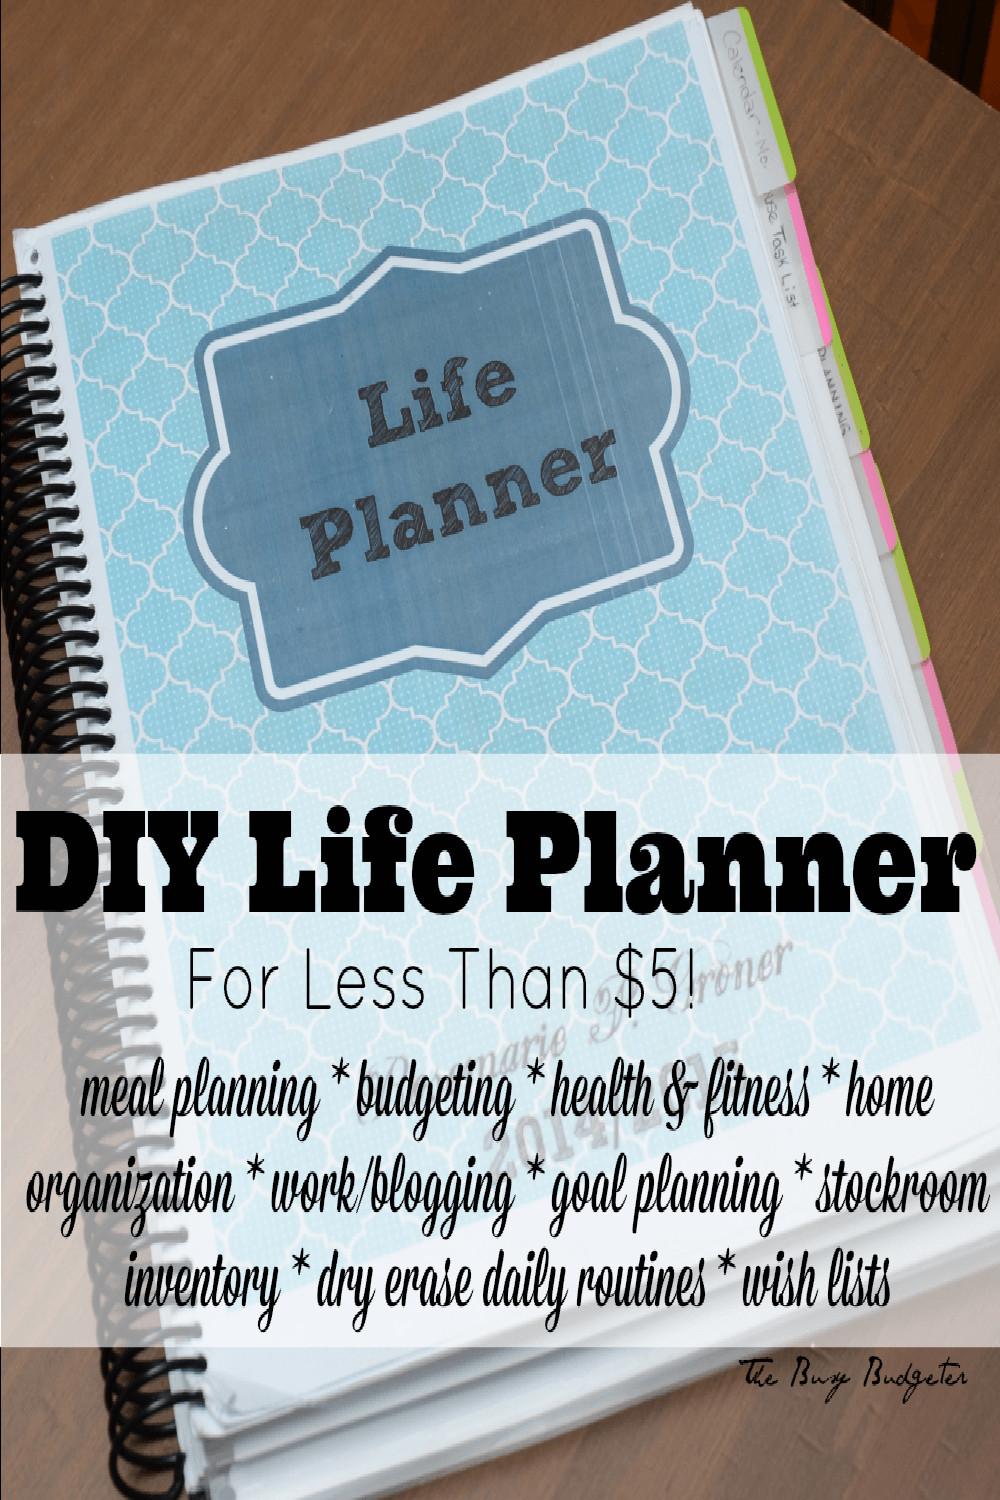 DIY Life Planner
 DIY Life Planner for Less than $5 The Busy Bud er